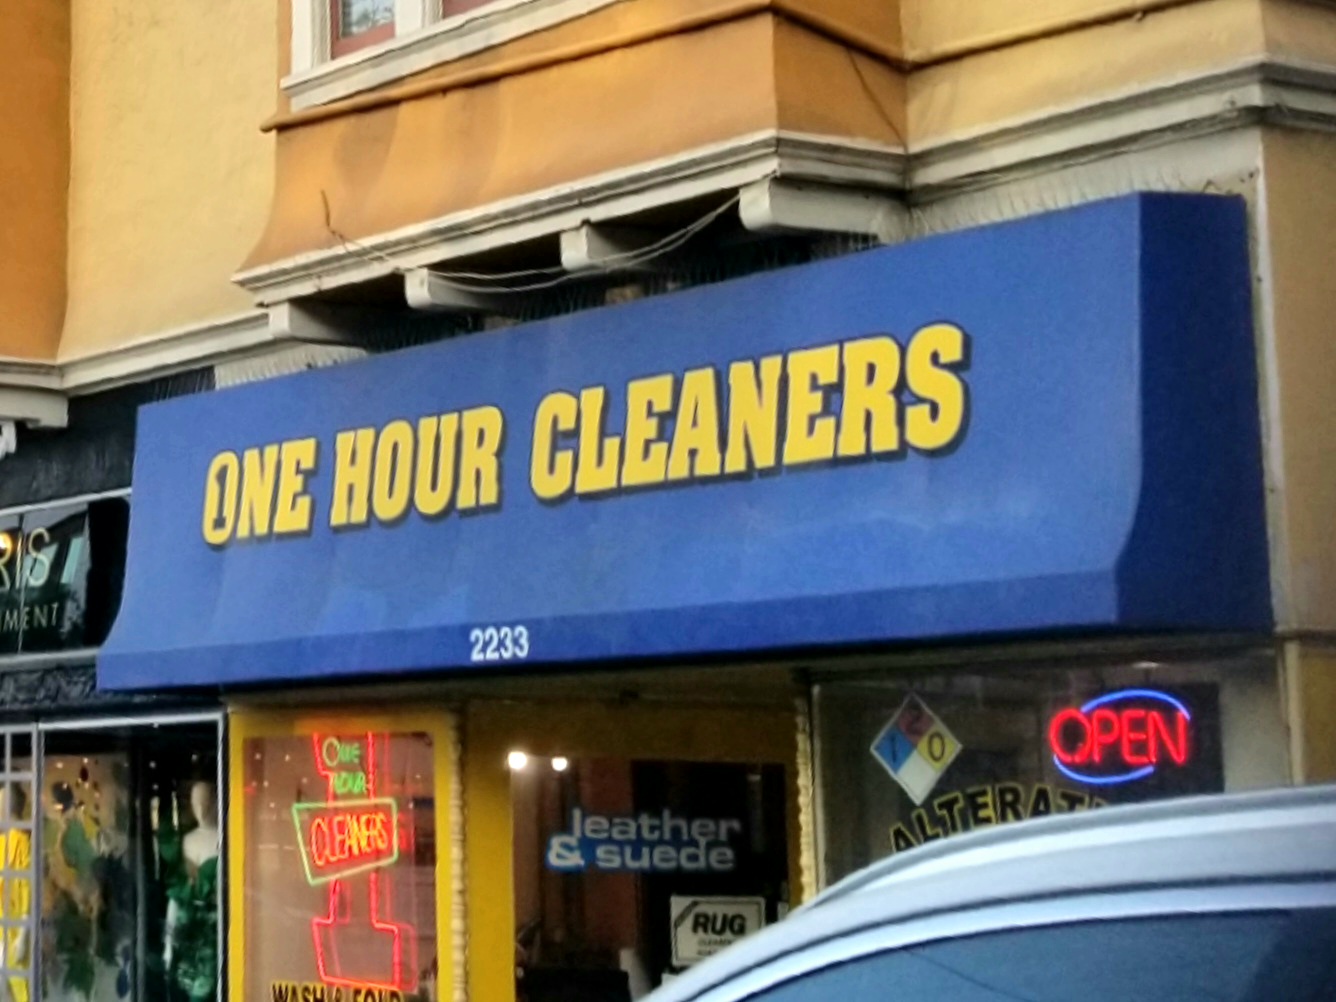 One Hour Cleaners